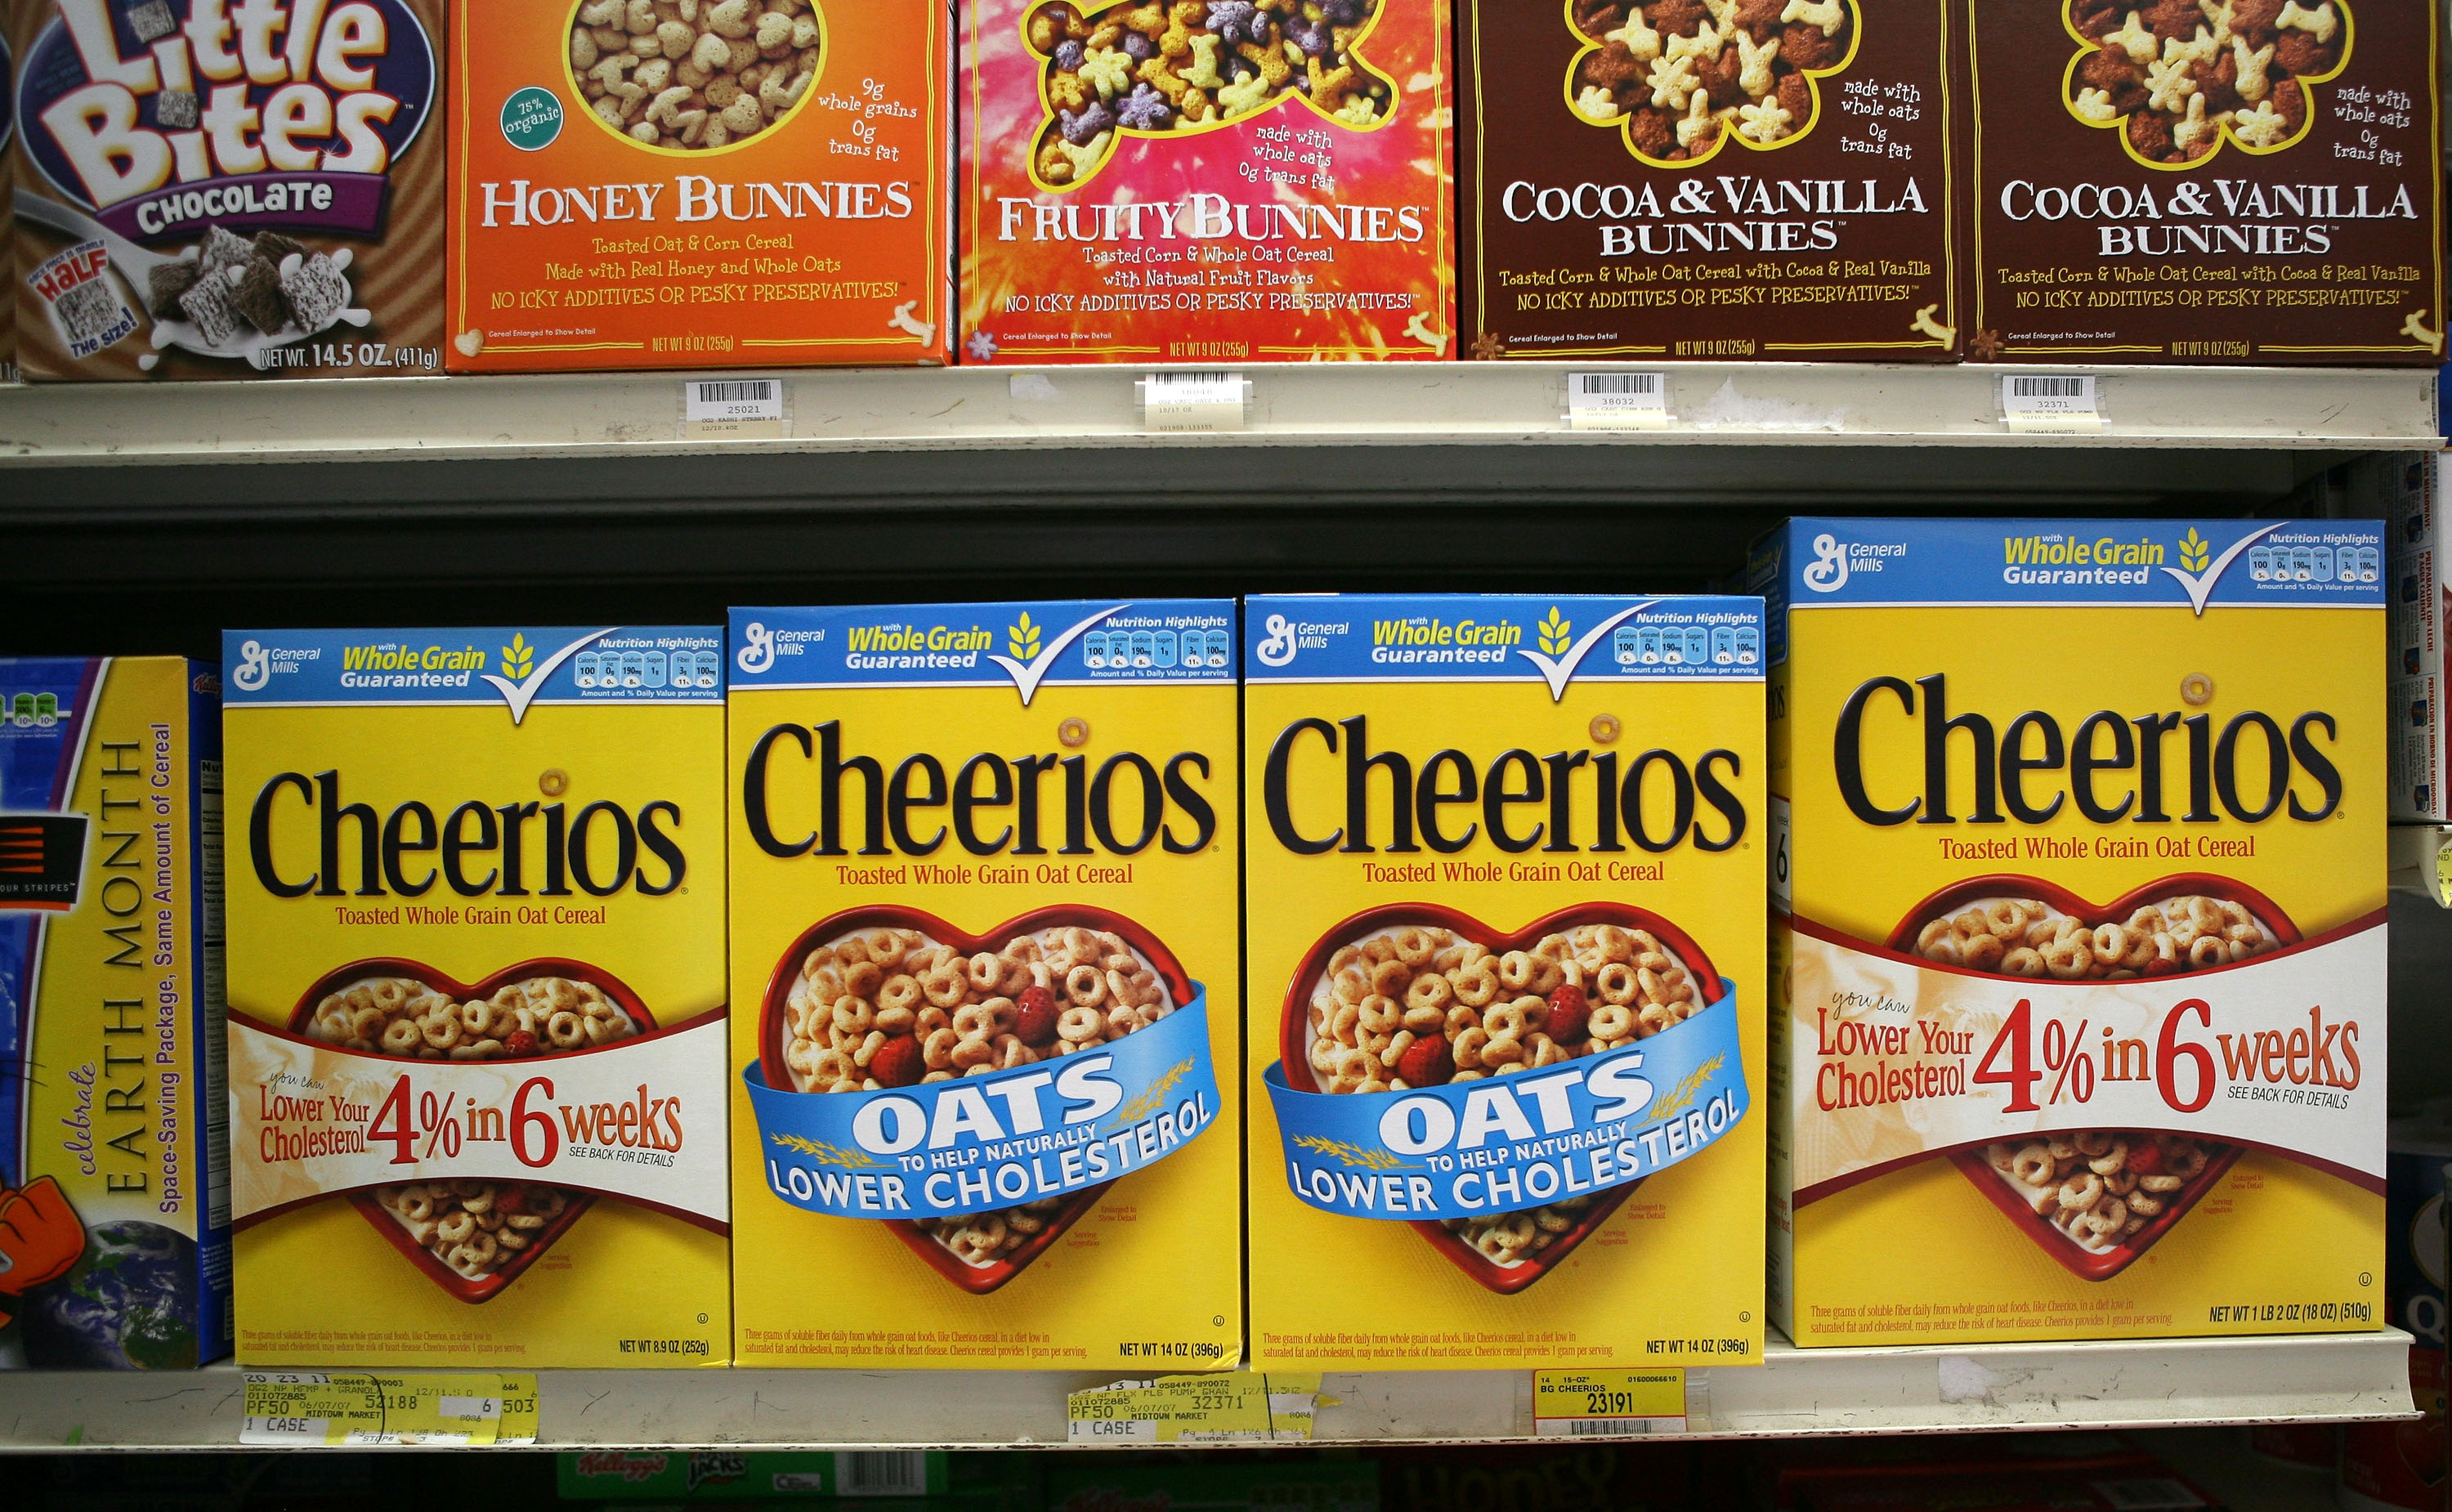 Boxes of Cheerios cereal are displayed on a shelf at the Midtown Market May 12, 2009 in Brisbane, California. (Justin Sullivan—Getty Images)